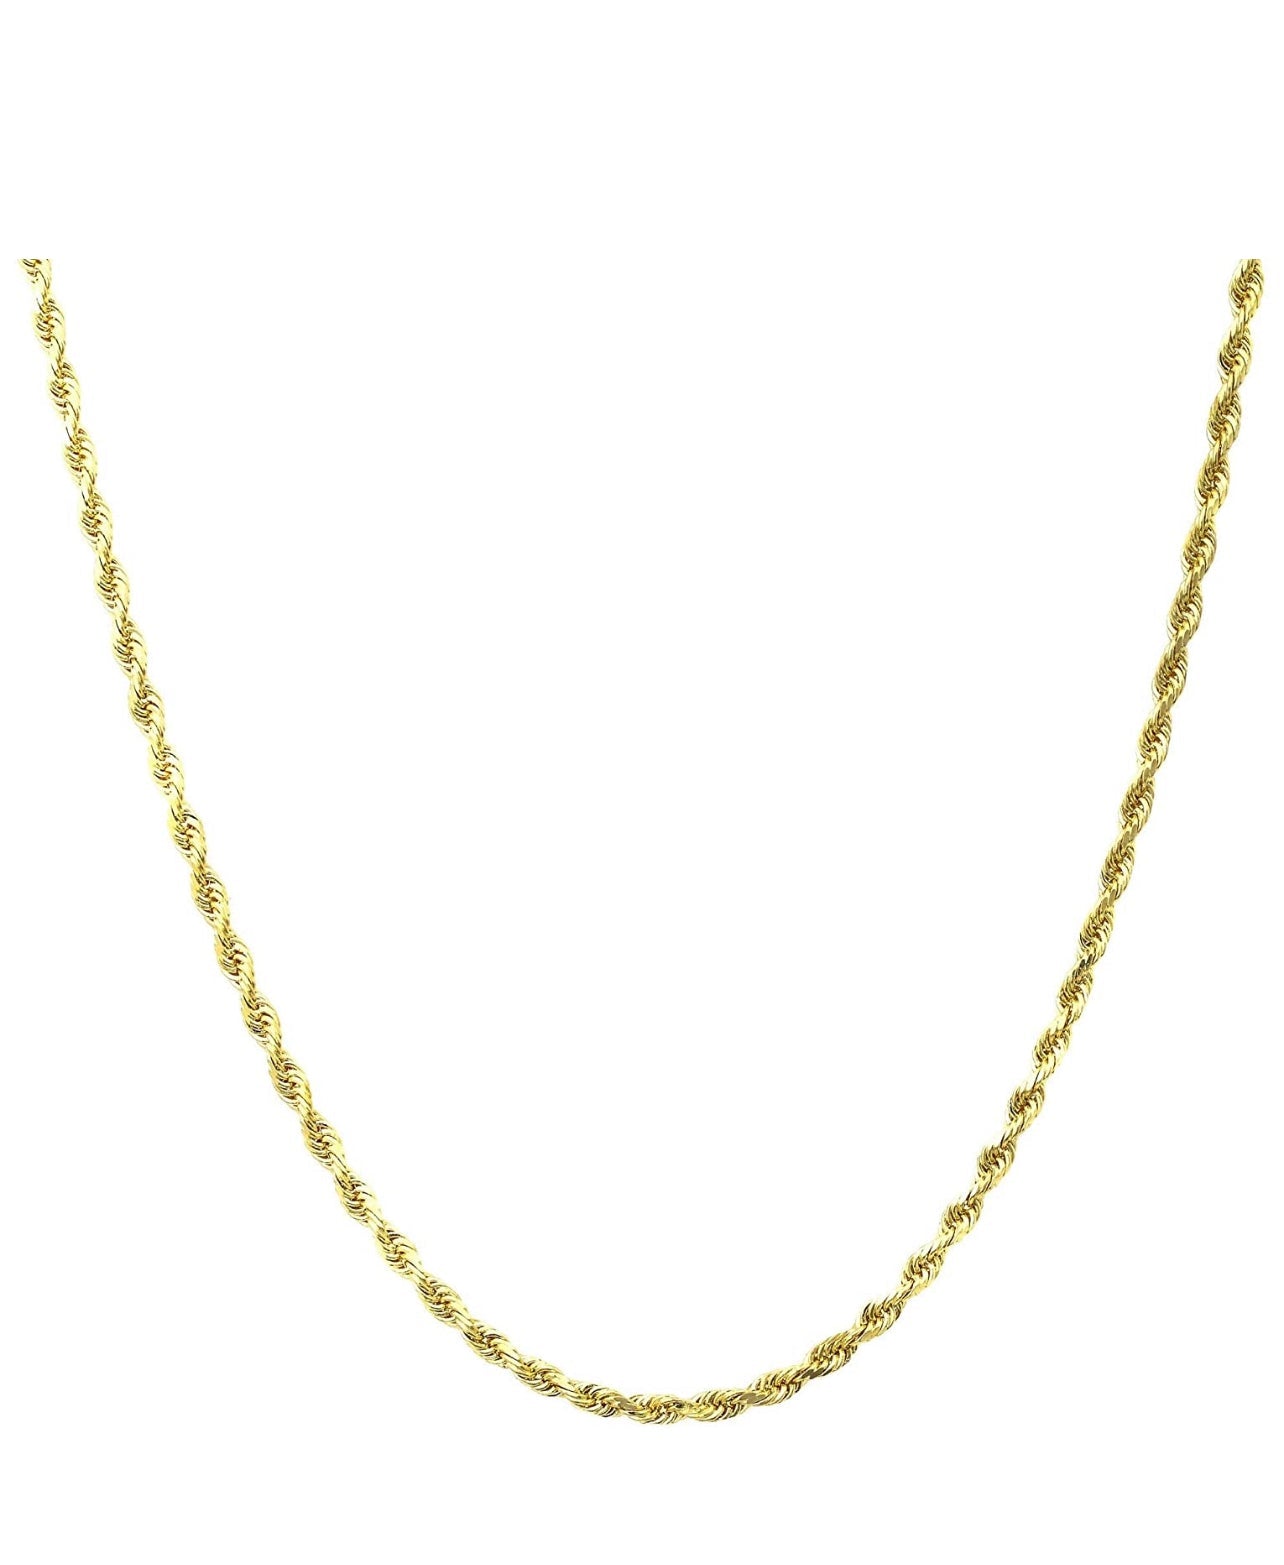 Dainty rope chain with no pendant